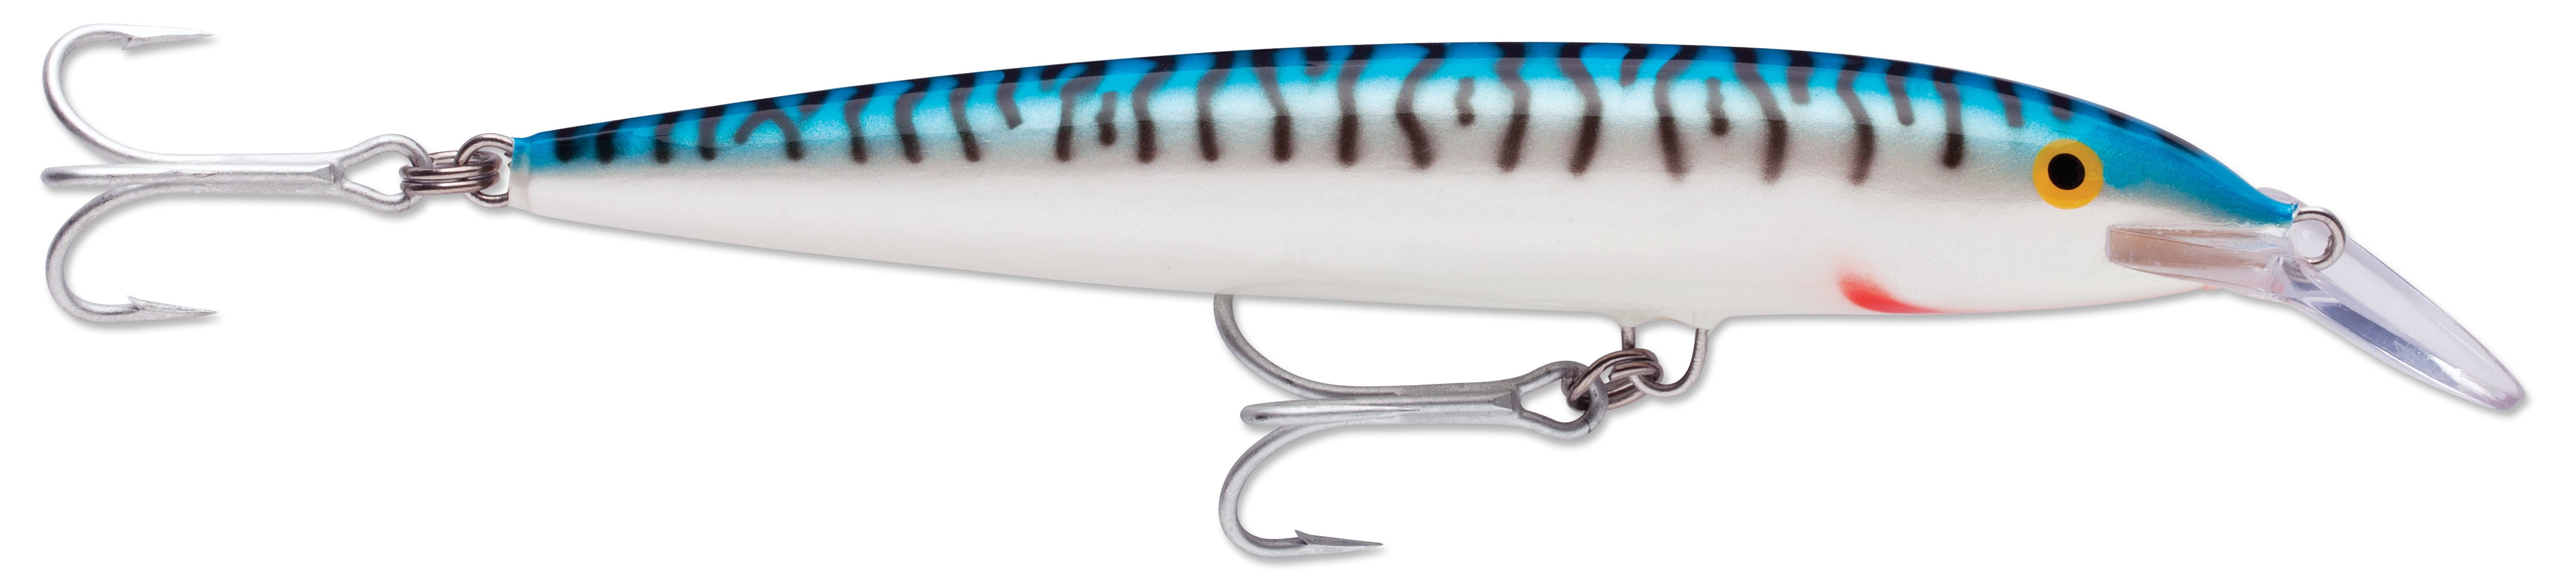 Rapala Floating Magnum Lure, Silver